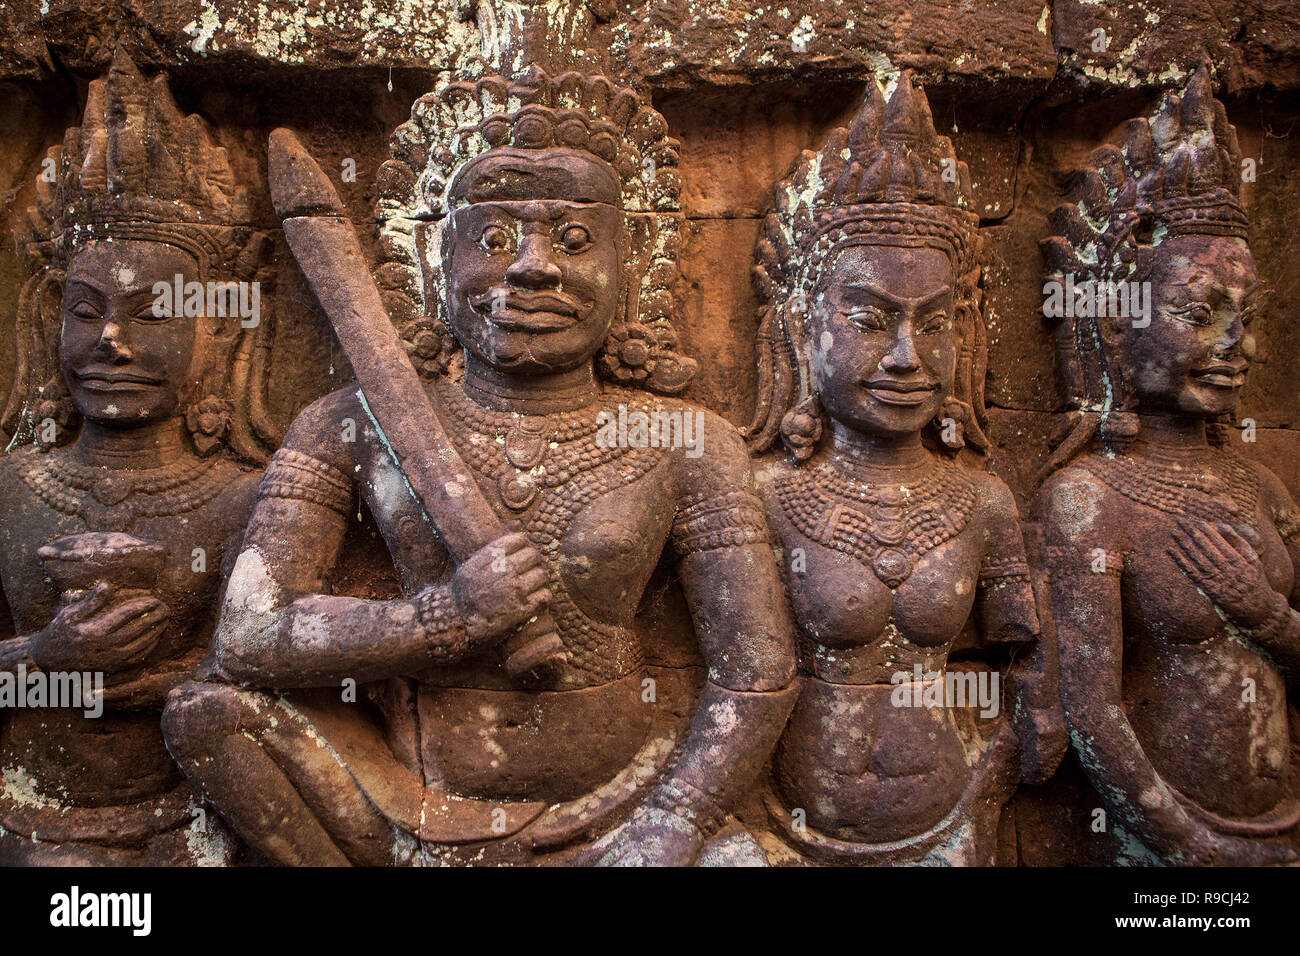 Sandstone bas-relief carvings at Angkor Thom Terrace of Elephants in Siem Reap, Cambodia. Stock Photo